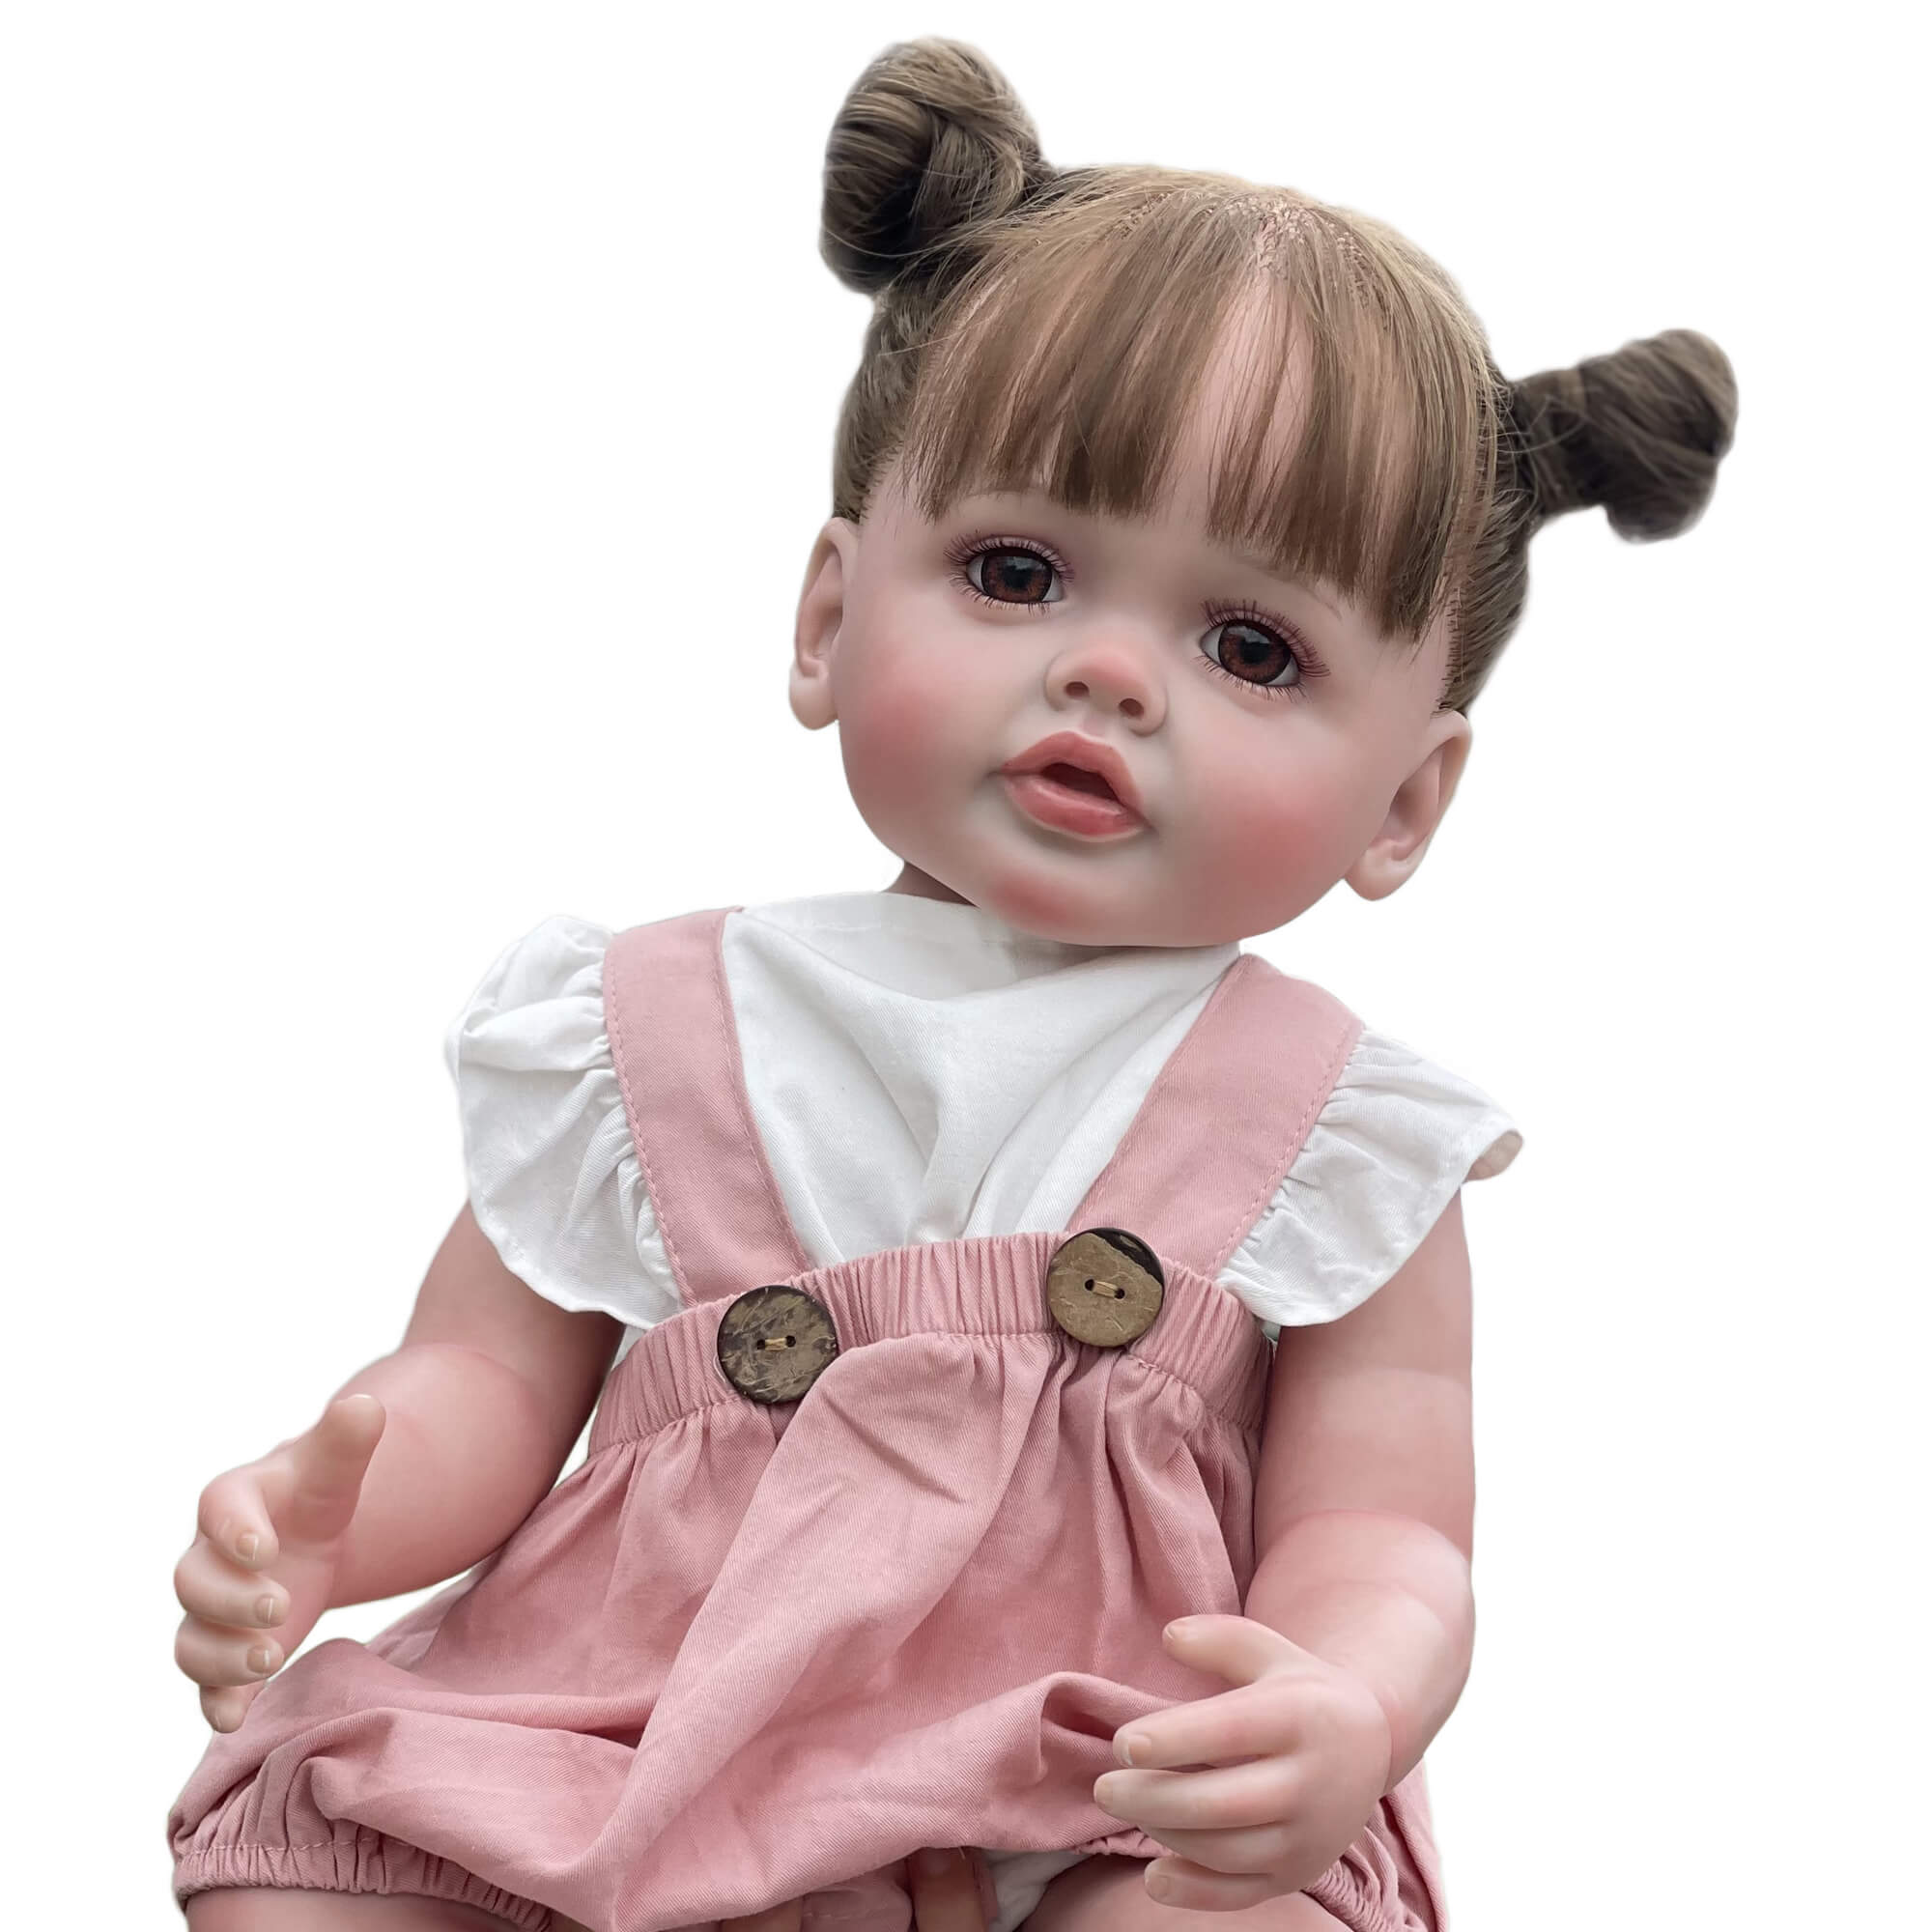 Reborn Baby Doll Newborn 22 Inches Reborn Toddler Doll Hand Drawn Baby Doll Real Life Size Baby Doll Toy